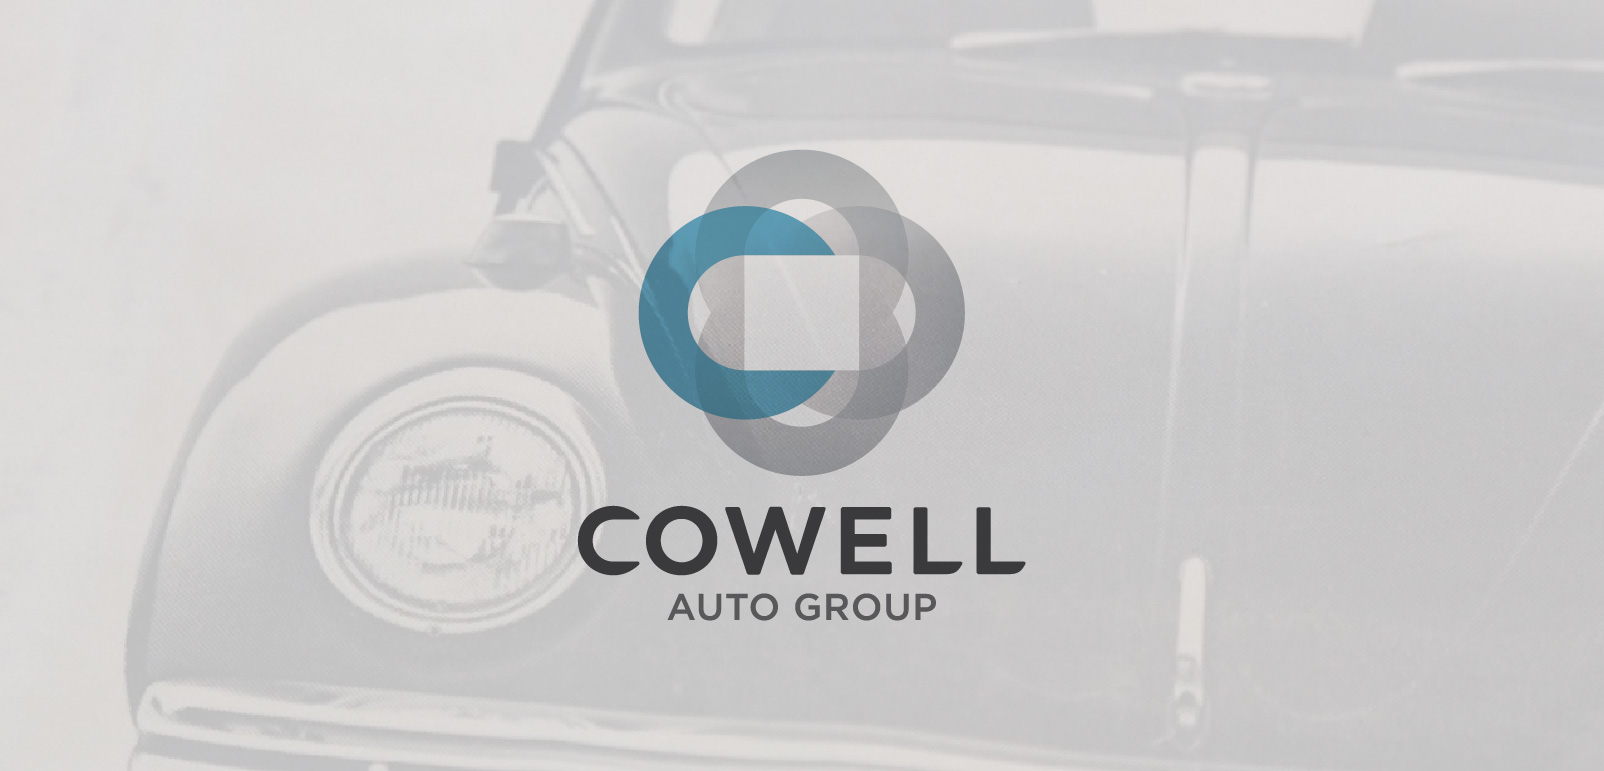 Cowell Auto Group